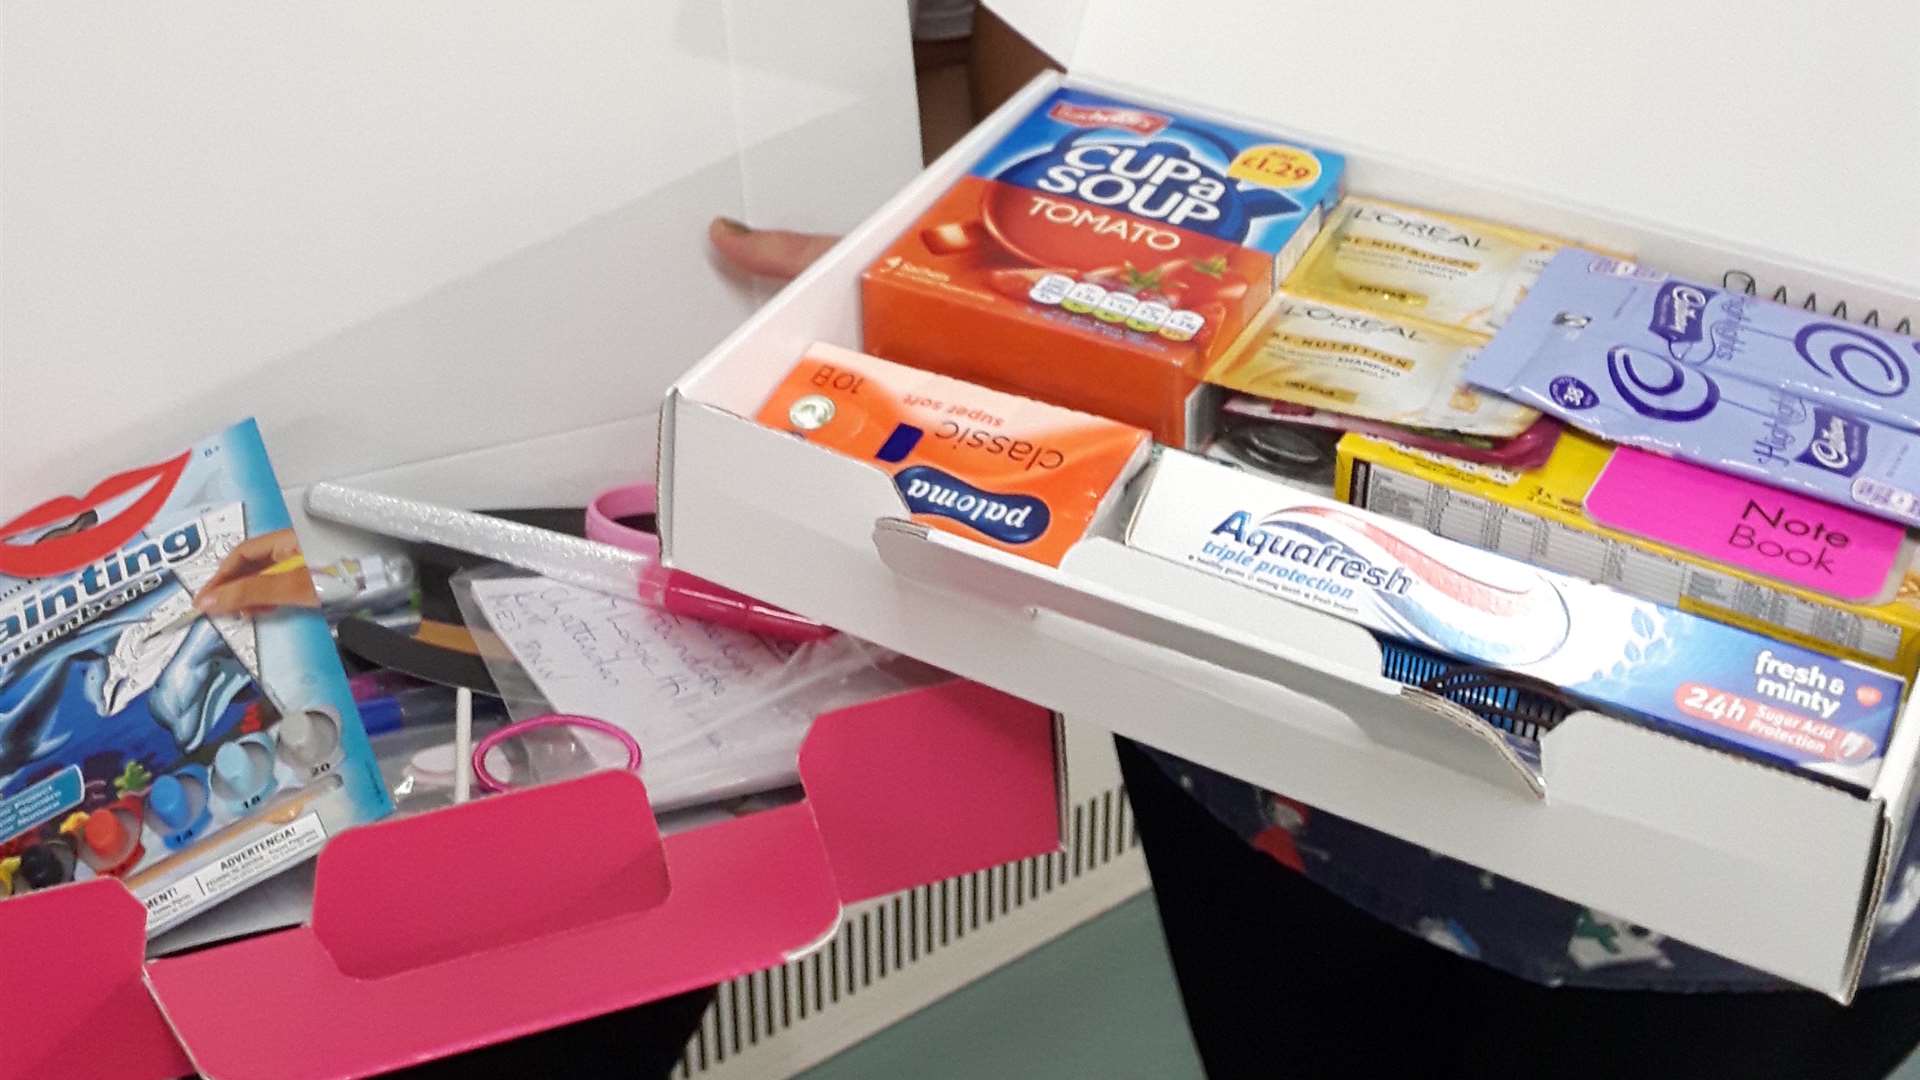 The boxes contain essentials such as a toothbrush, shampoo and packets of instant soup